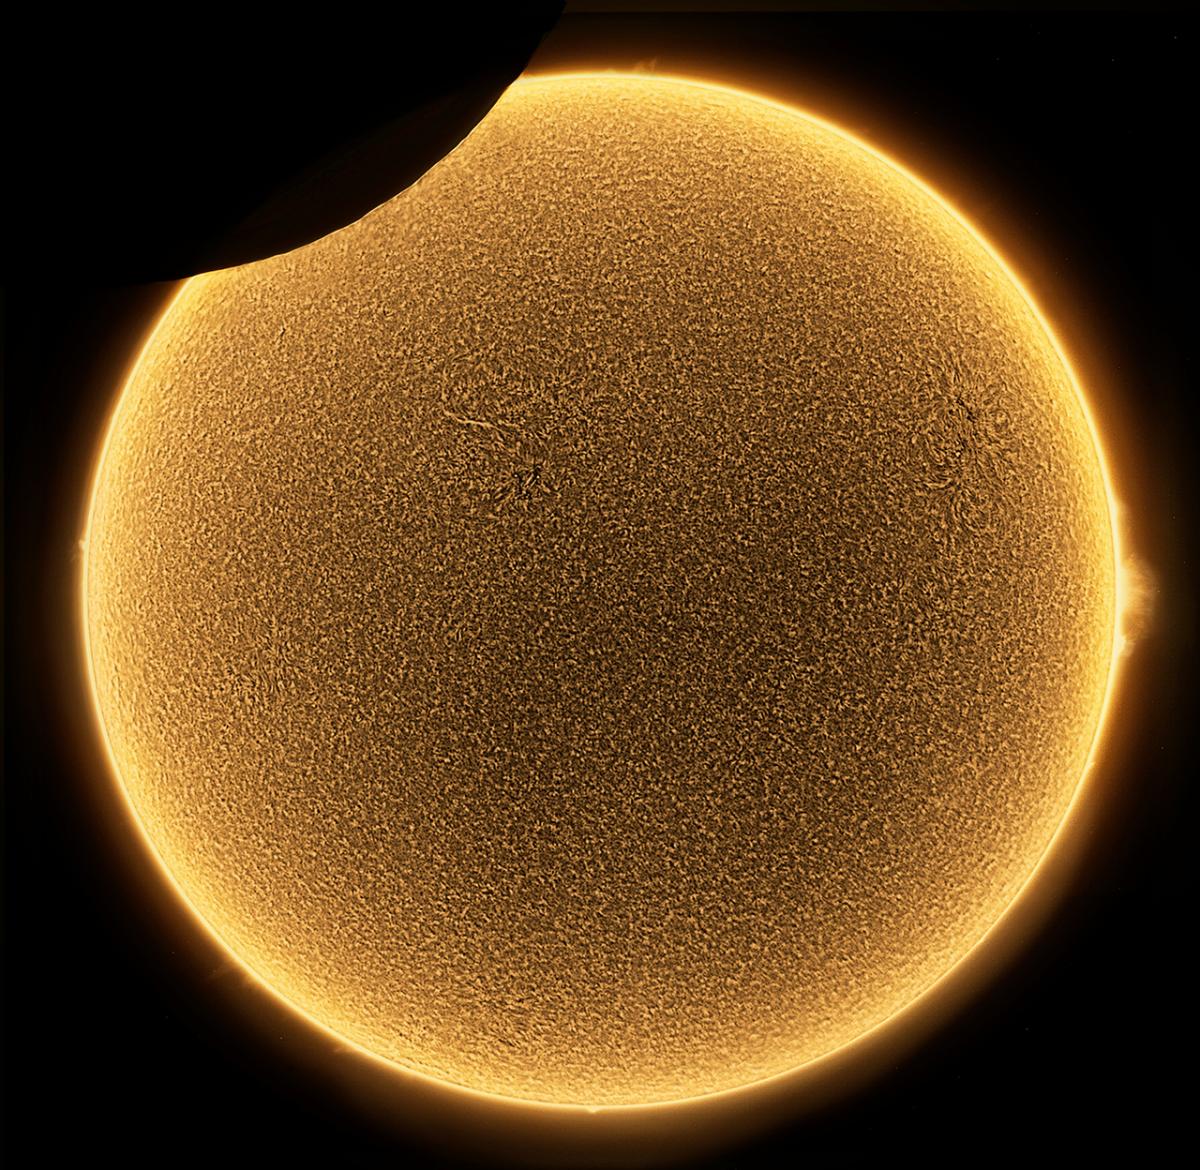 Partial eclipse of the Sun as it reaches its maximum. Central yellow sun with top left section covered by shadow of the Moon